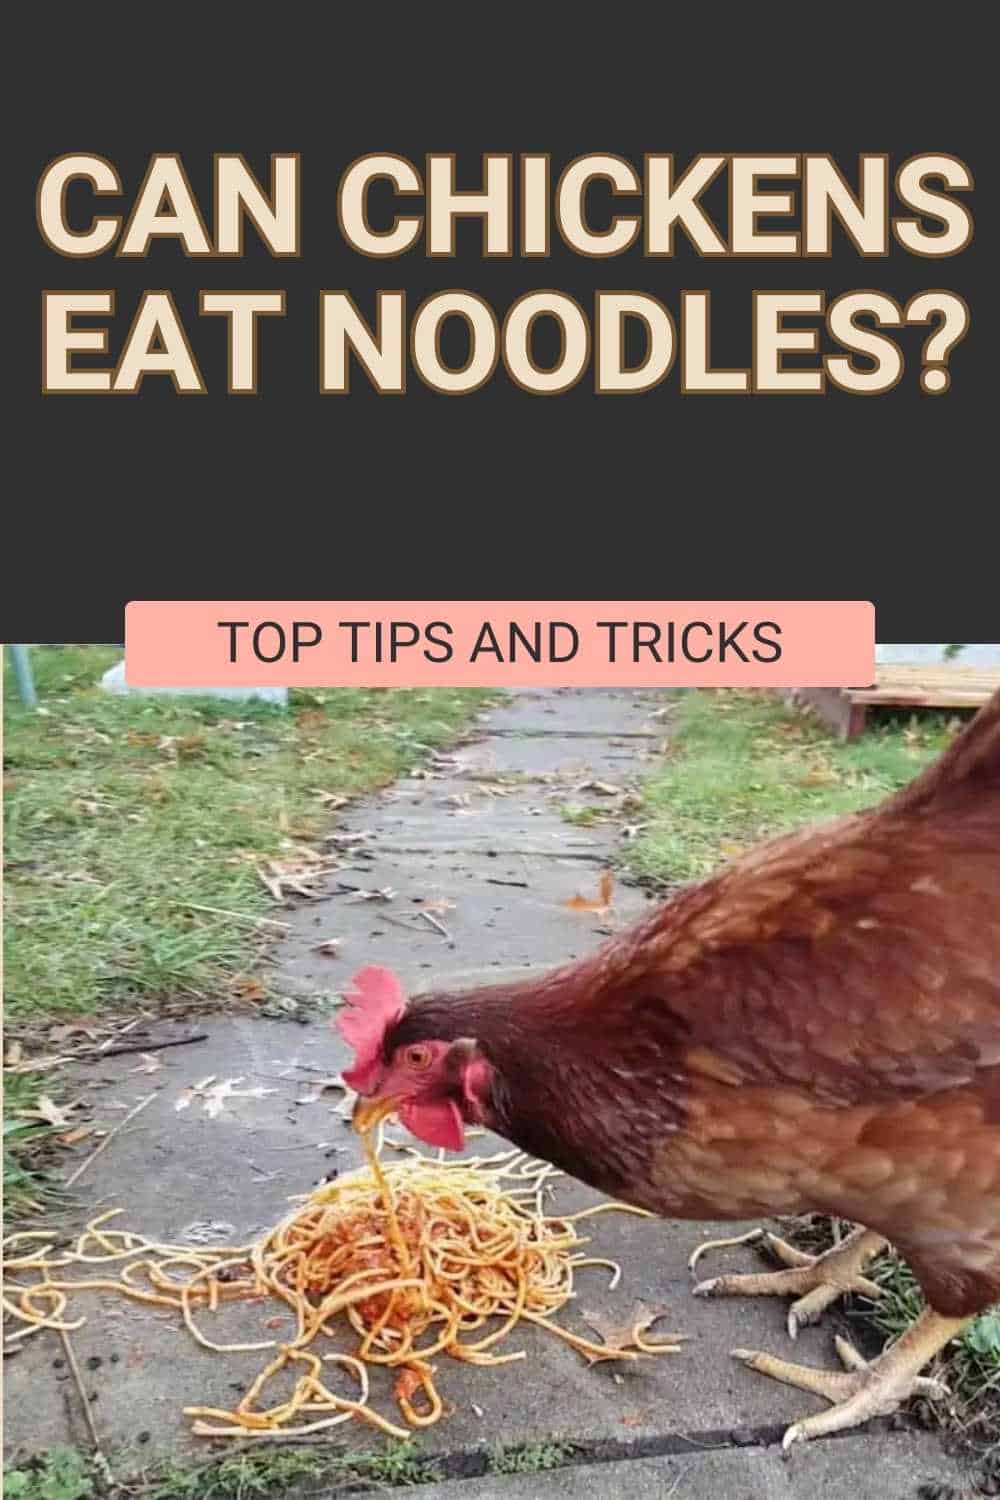 Can Chickens Eat Noodles